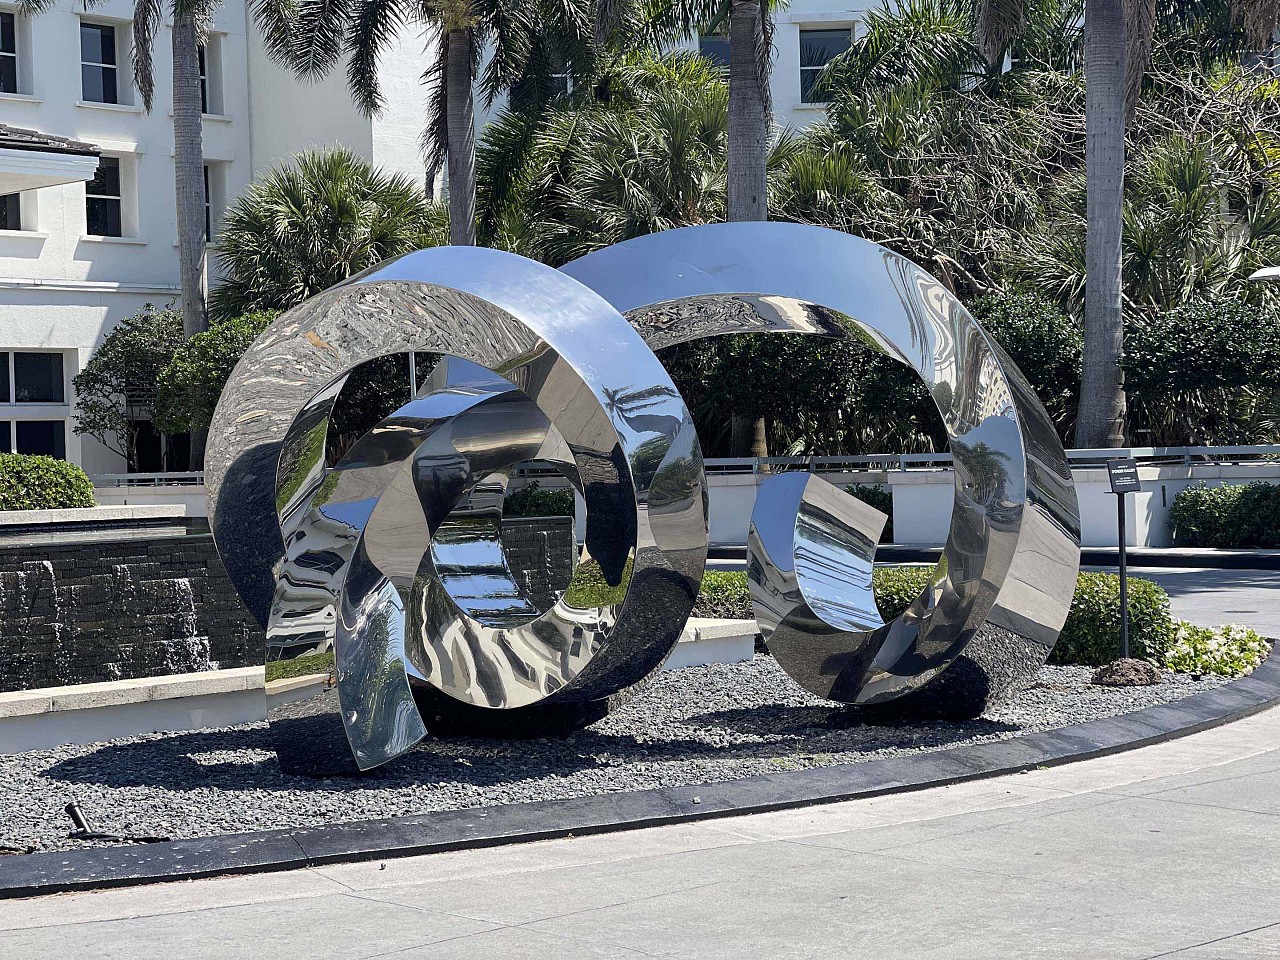 Gino Miles, Z Passage, 2022
stainless steel, 96 x 120 x 156 in.
MILE00043